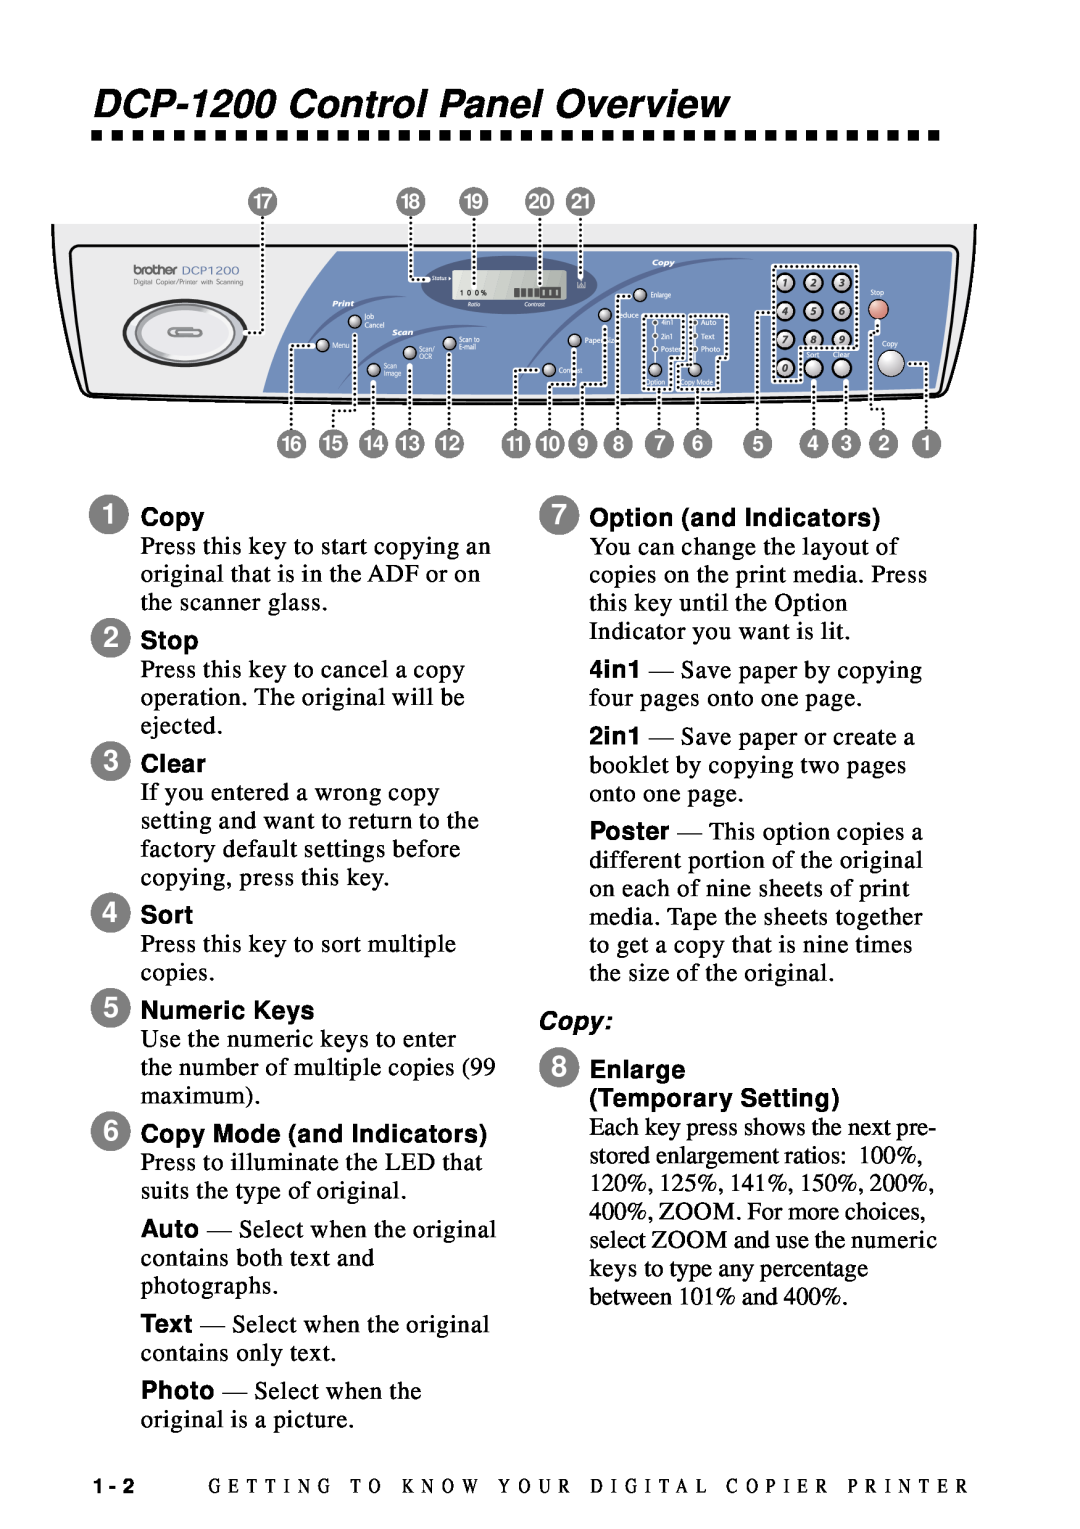 Brother DCP1200 manual DCP-1200 Control Panel Overview, Stop, Clear, Sort, Numeric Keys, Copy Mode and Indicators 